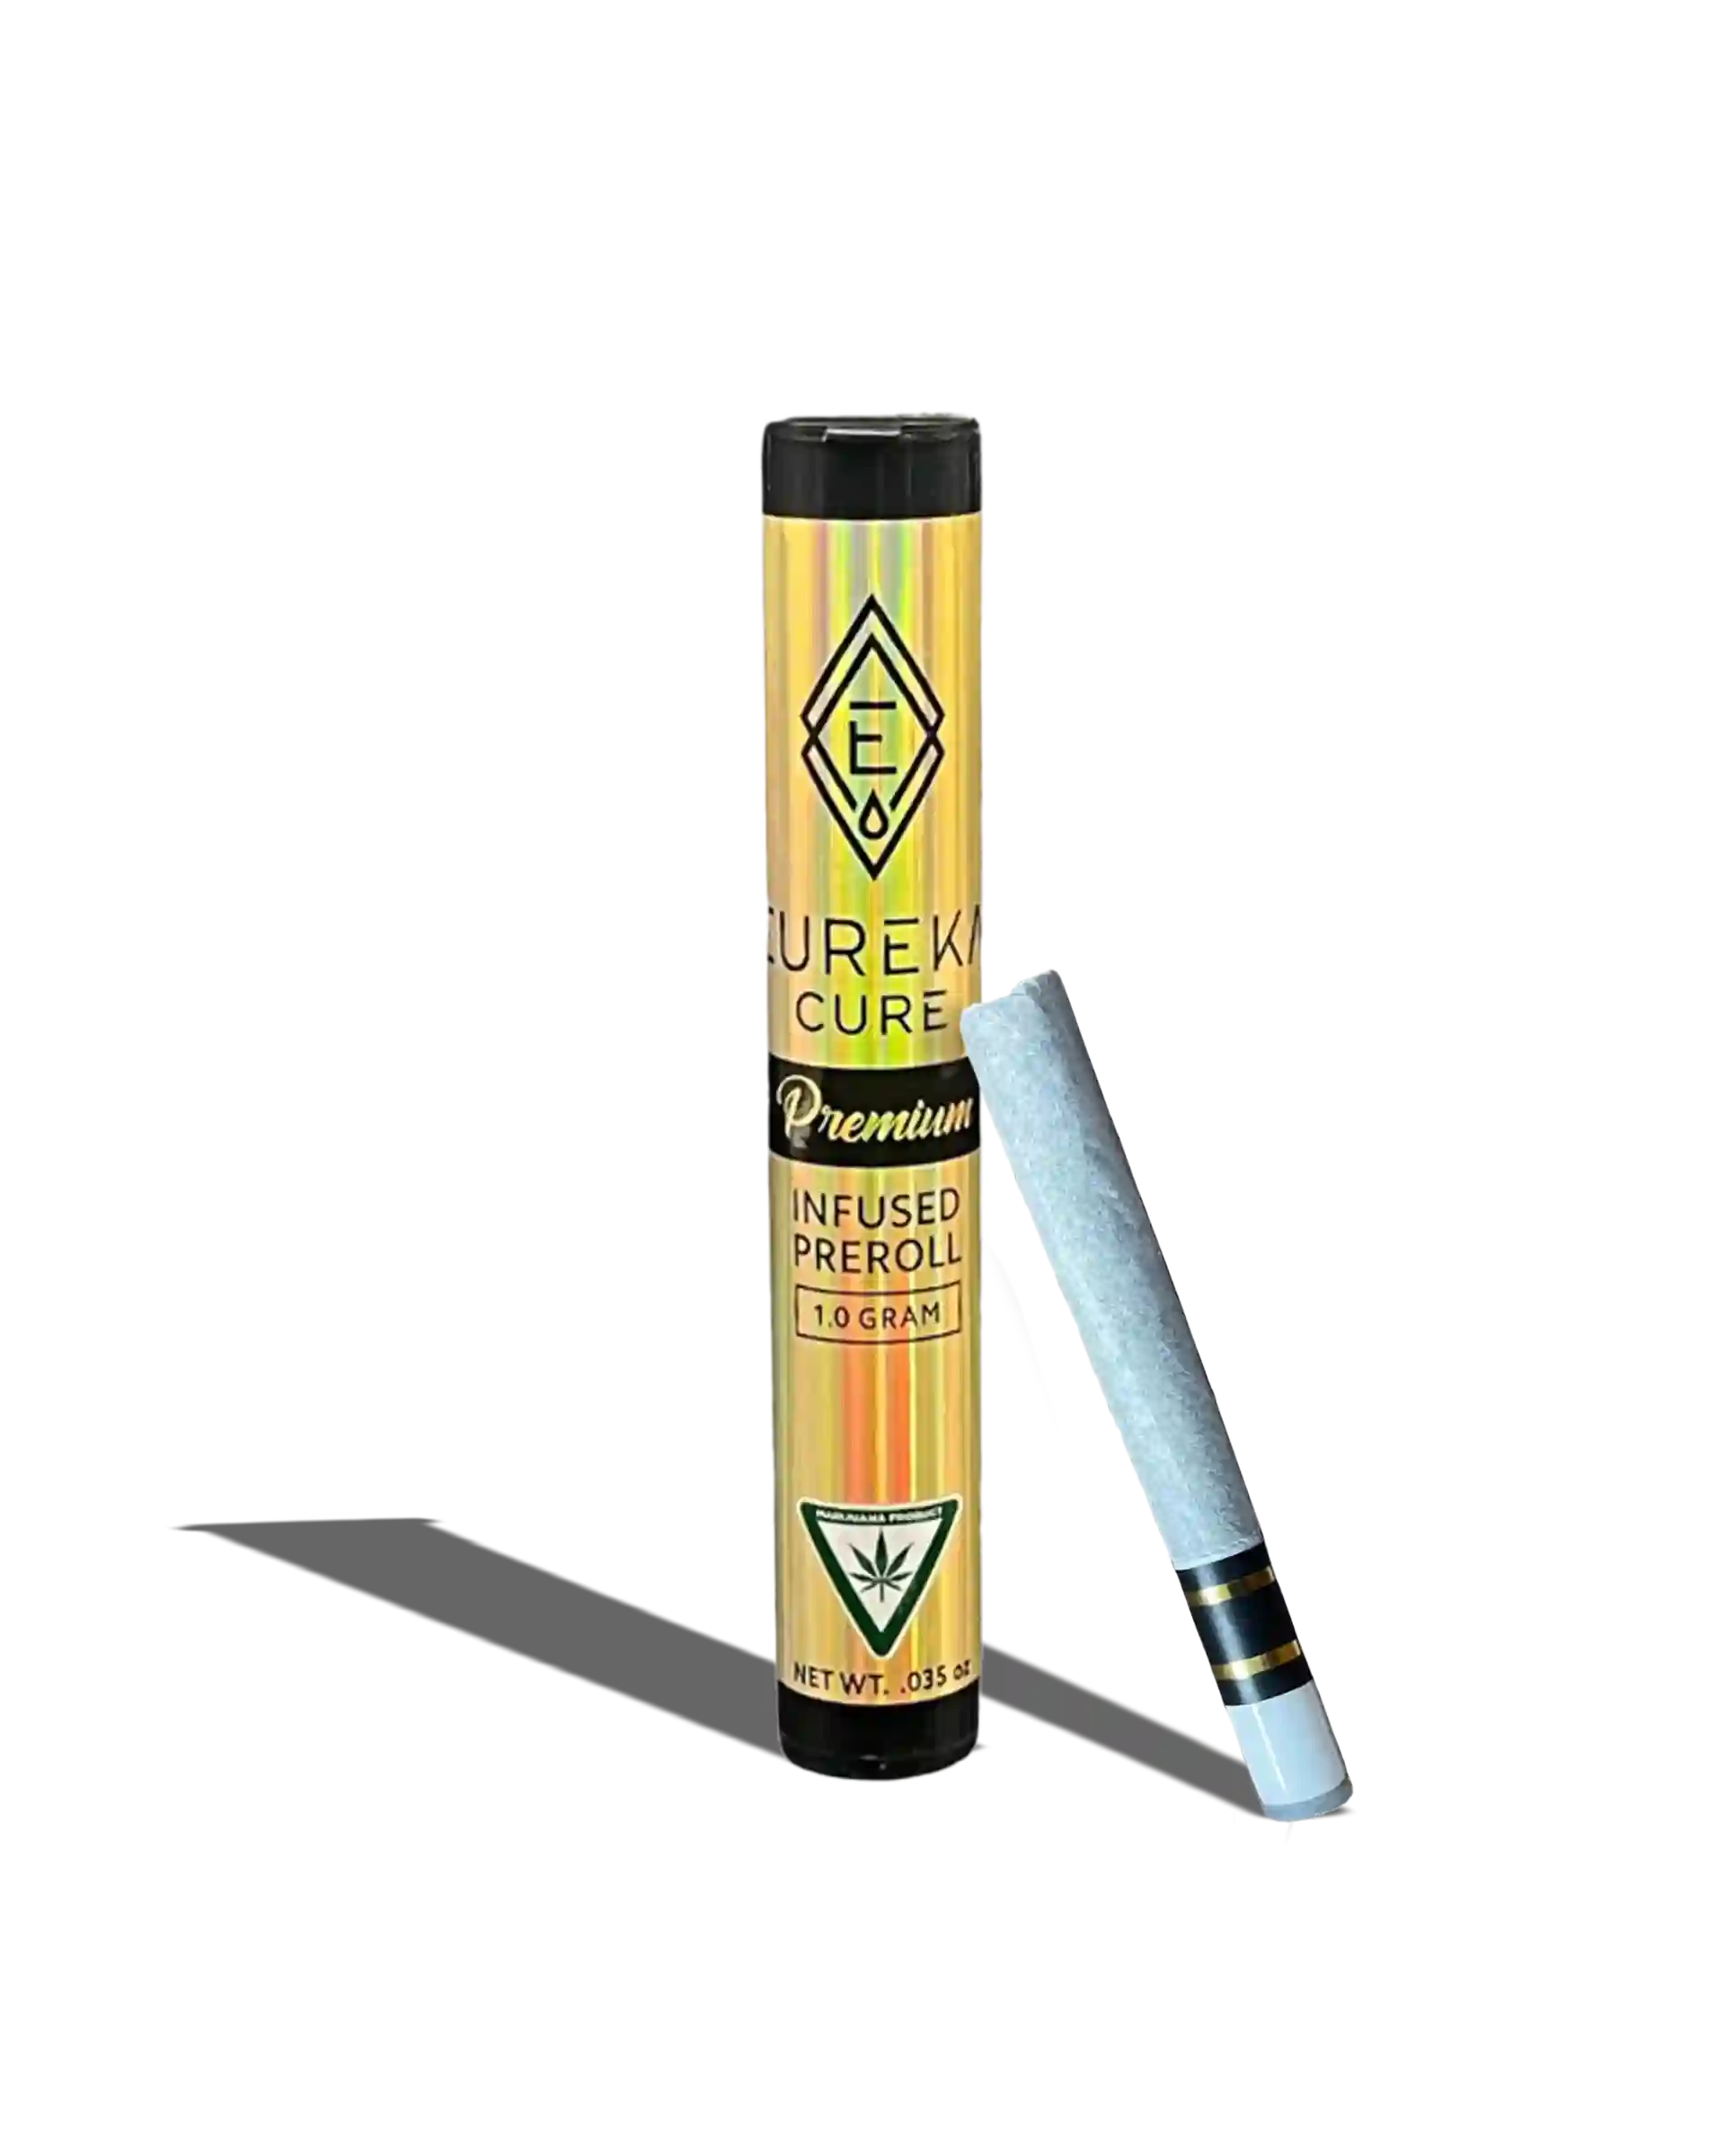 Queso Perro X Garlic Icing Live Resin Infused Preroll 1g